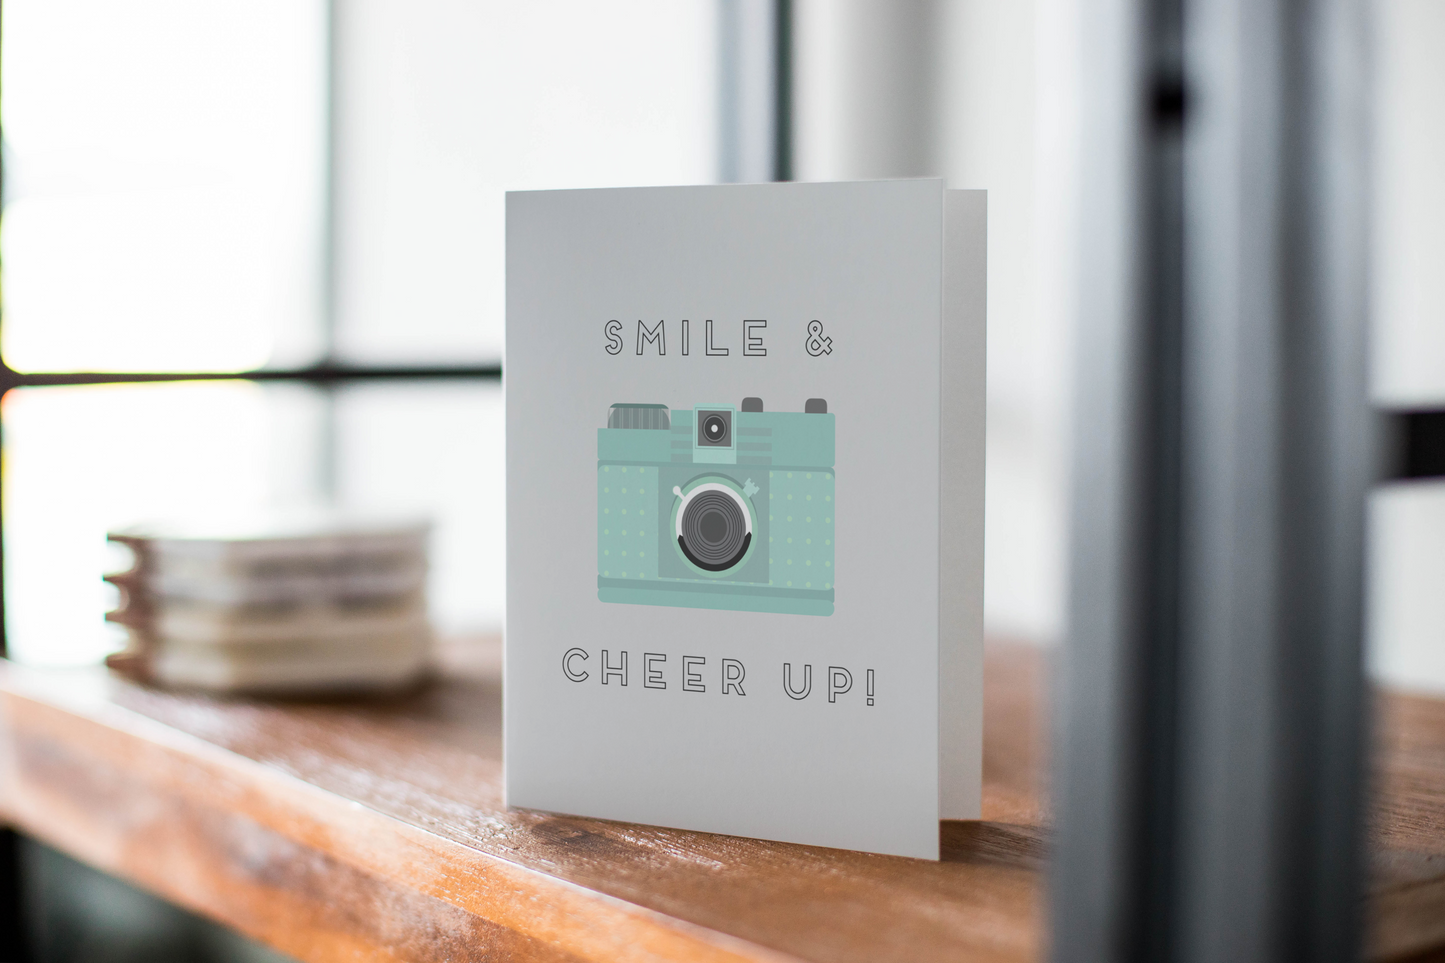 Smile & Cheer Up! - Thinking Of You Greeting Card.